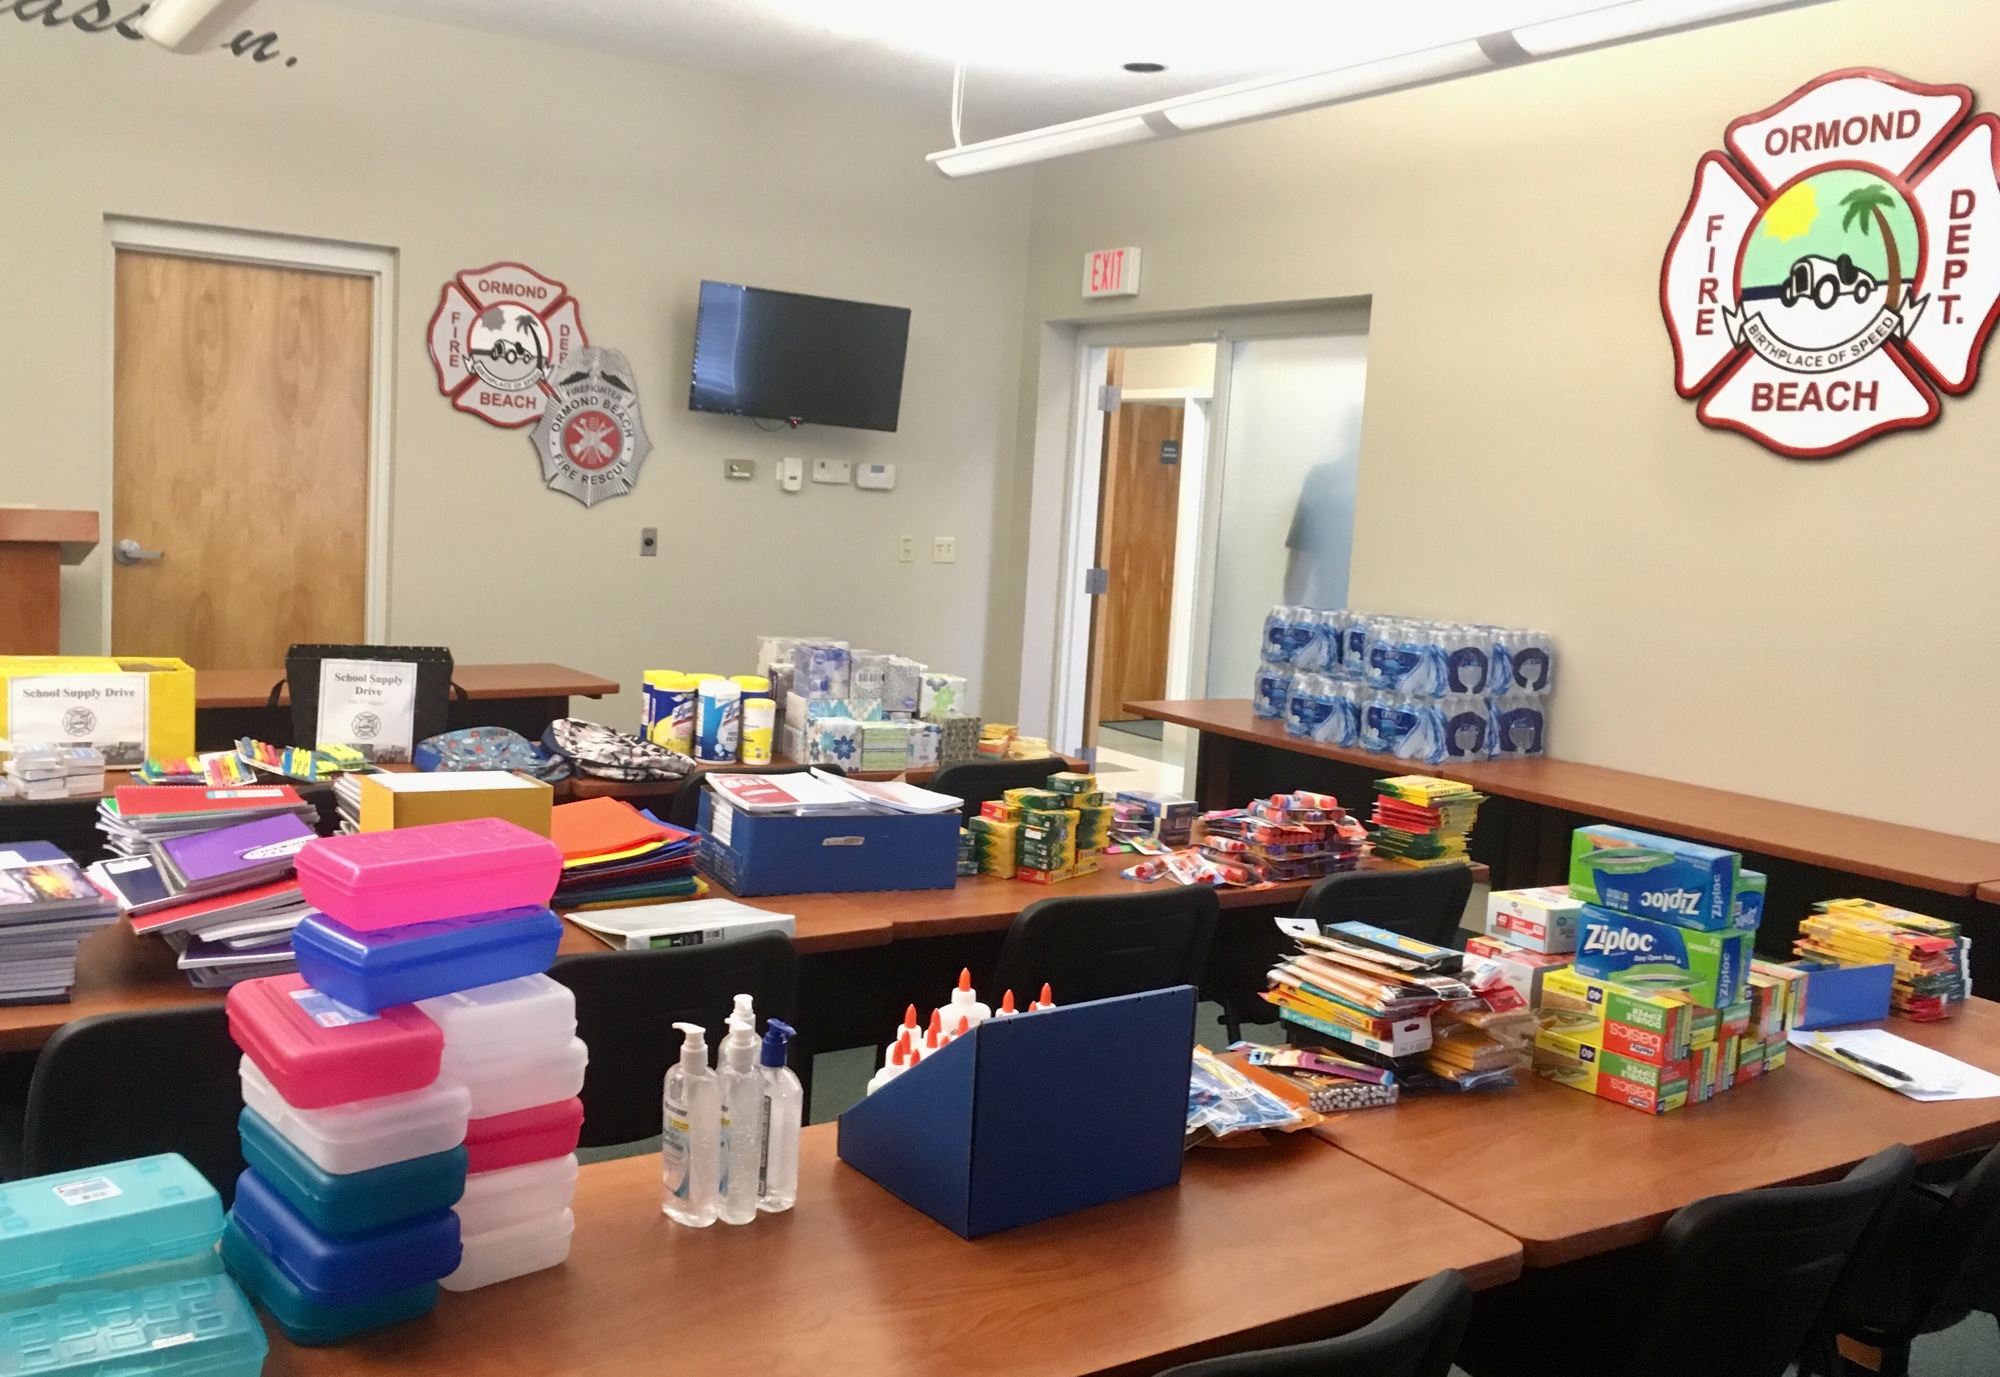 Supplies ready to be distributed at an Ormond Beach Fire Station. Courtesy photo